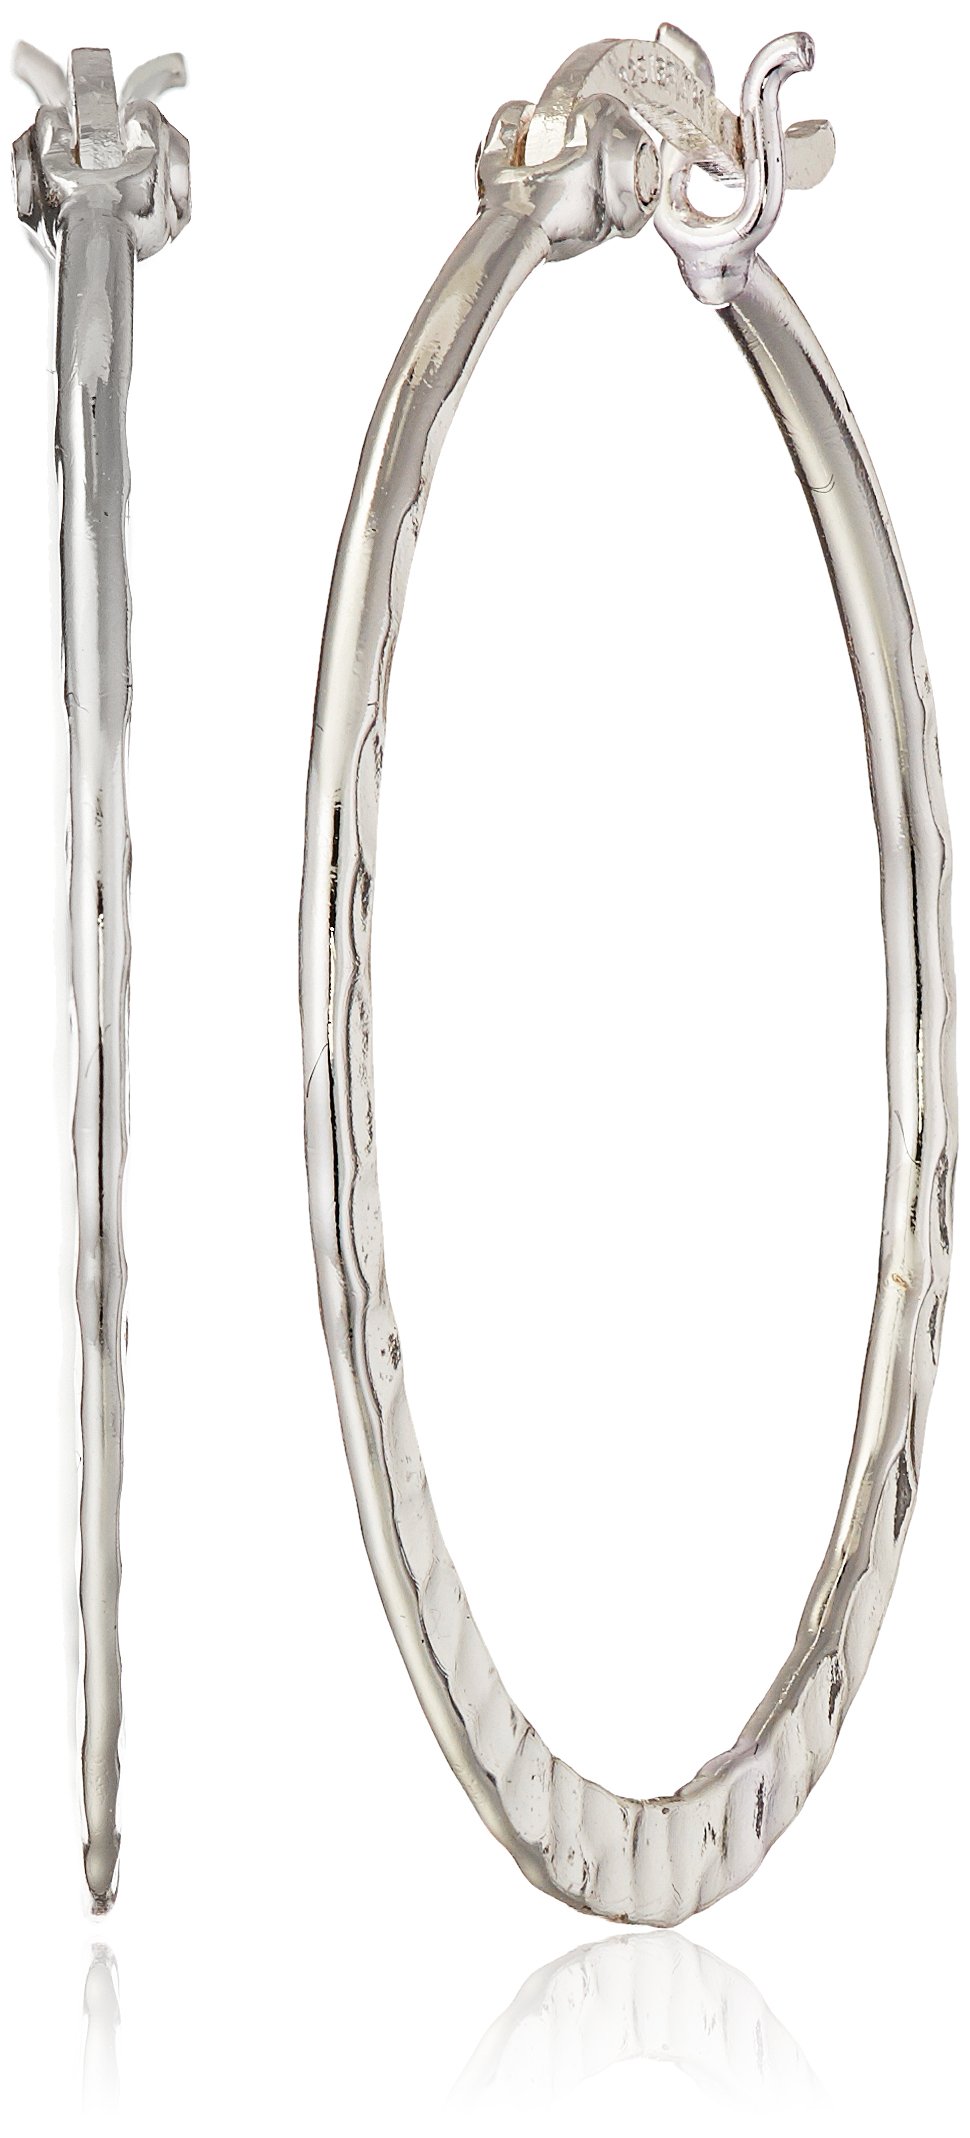 Amazon Collection 925 Sterling Silver Hammered Hoop Earrings